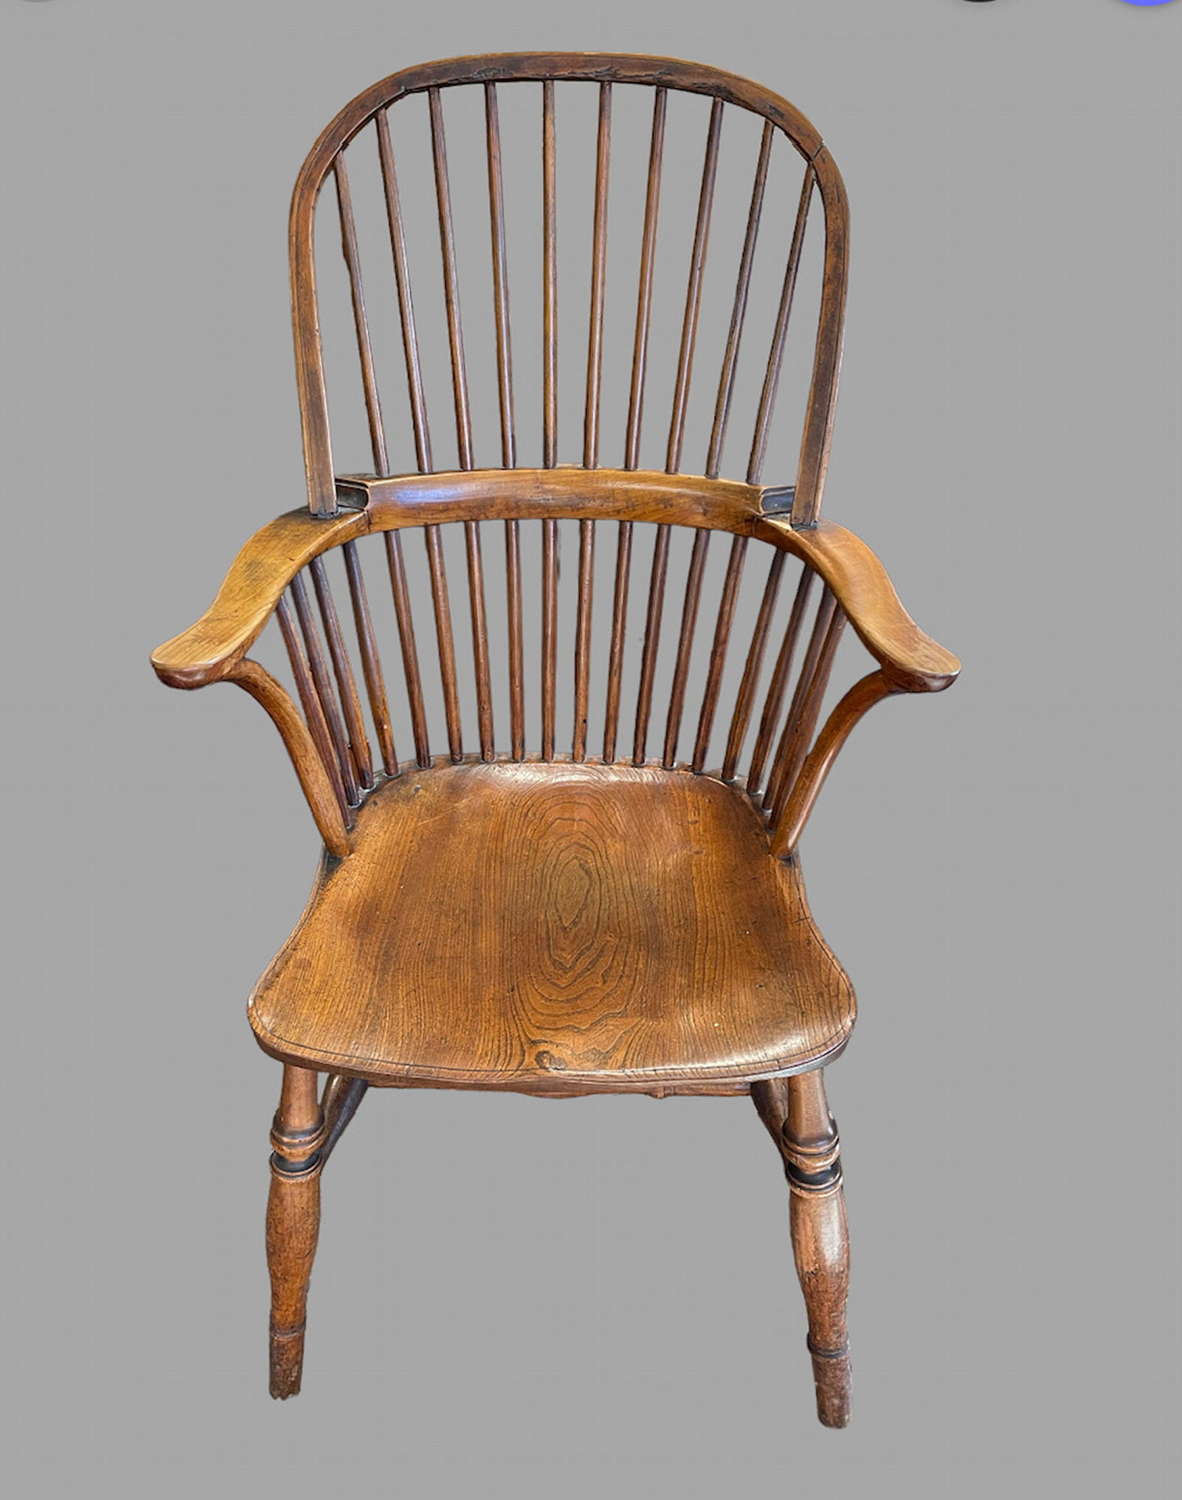 A 19thc Ash and Elm Windsor chair